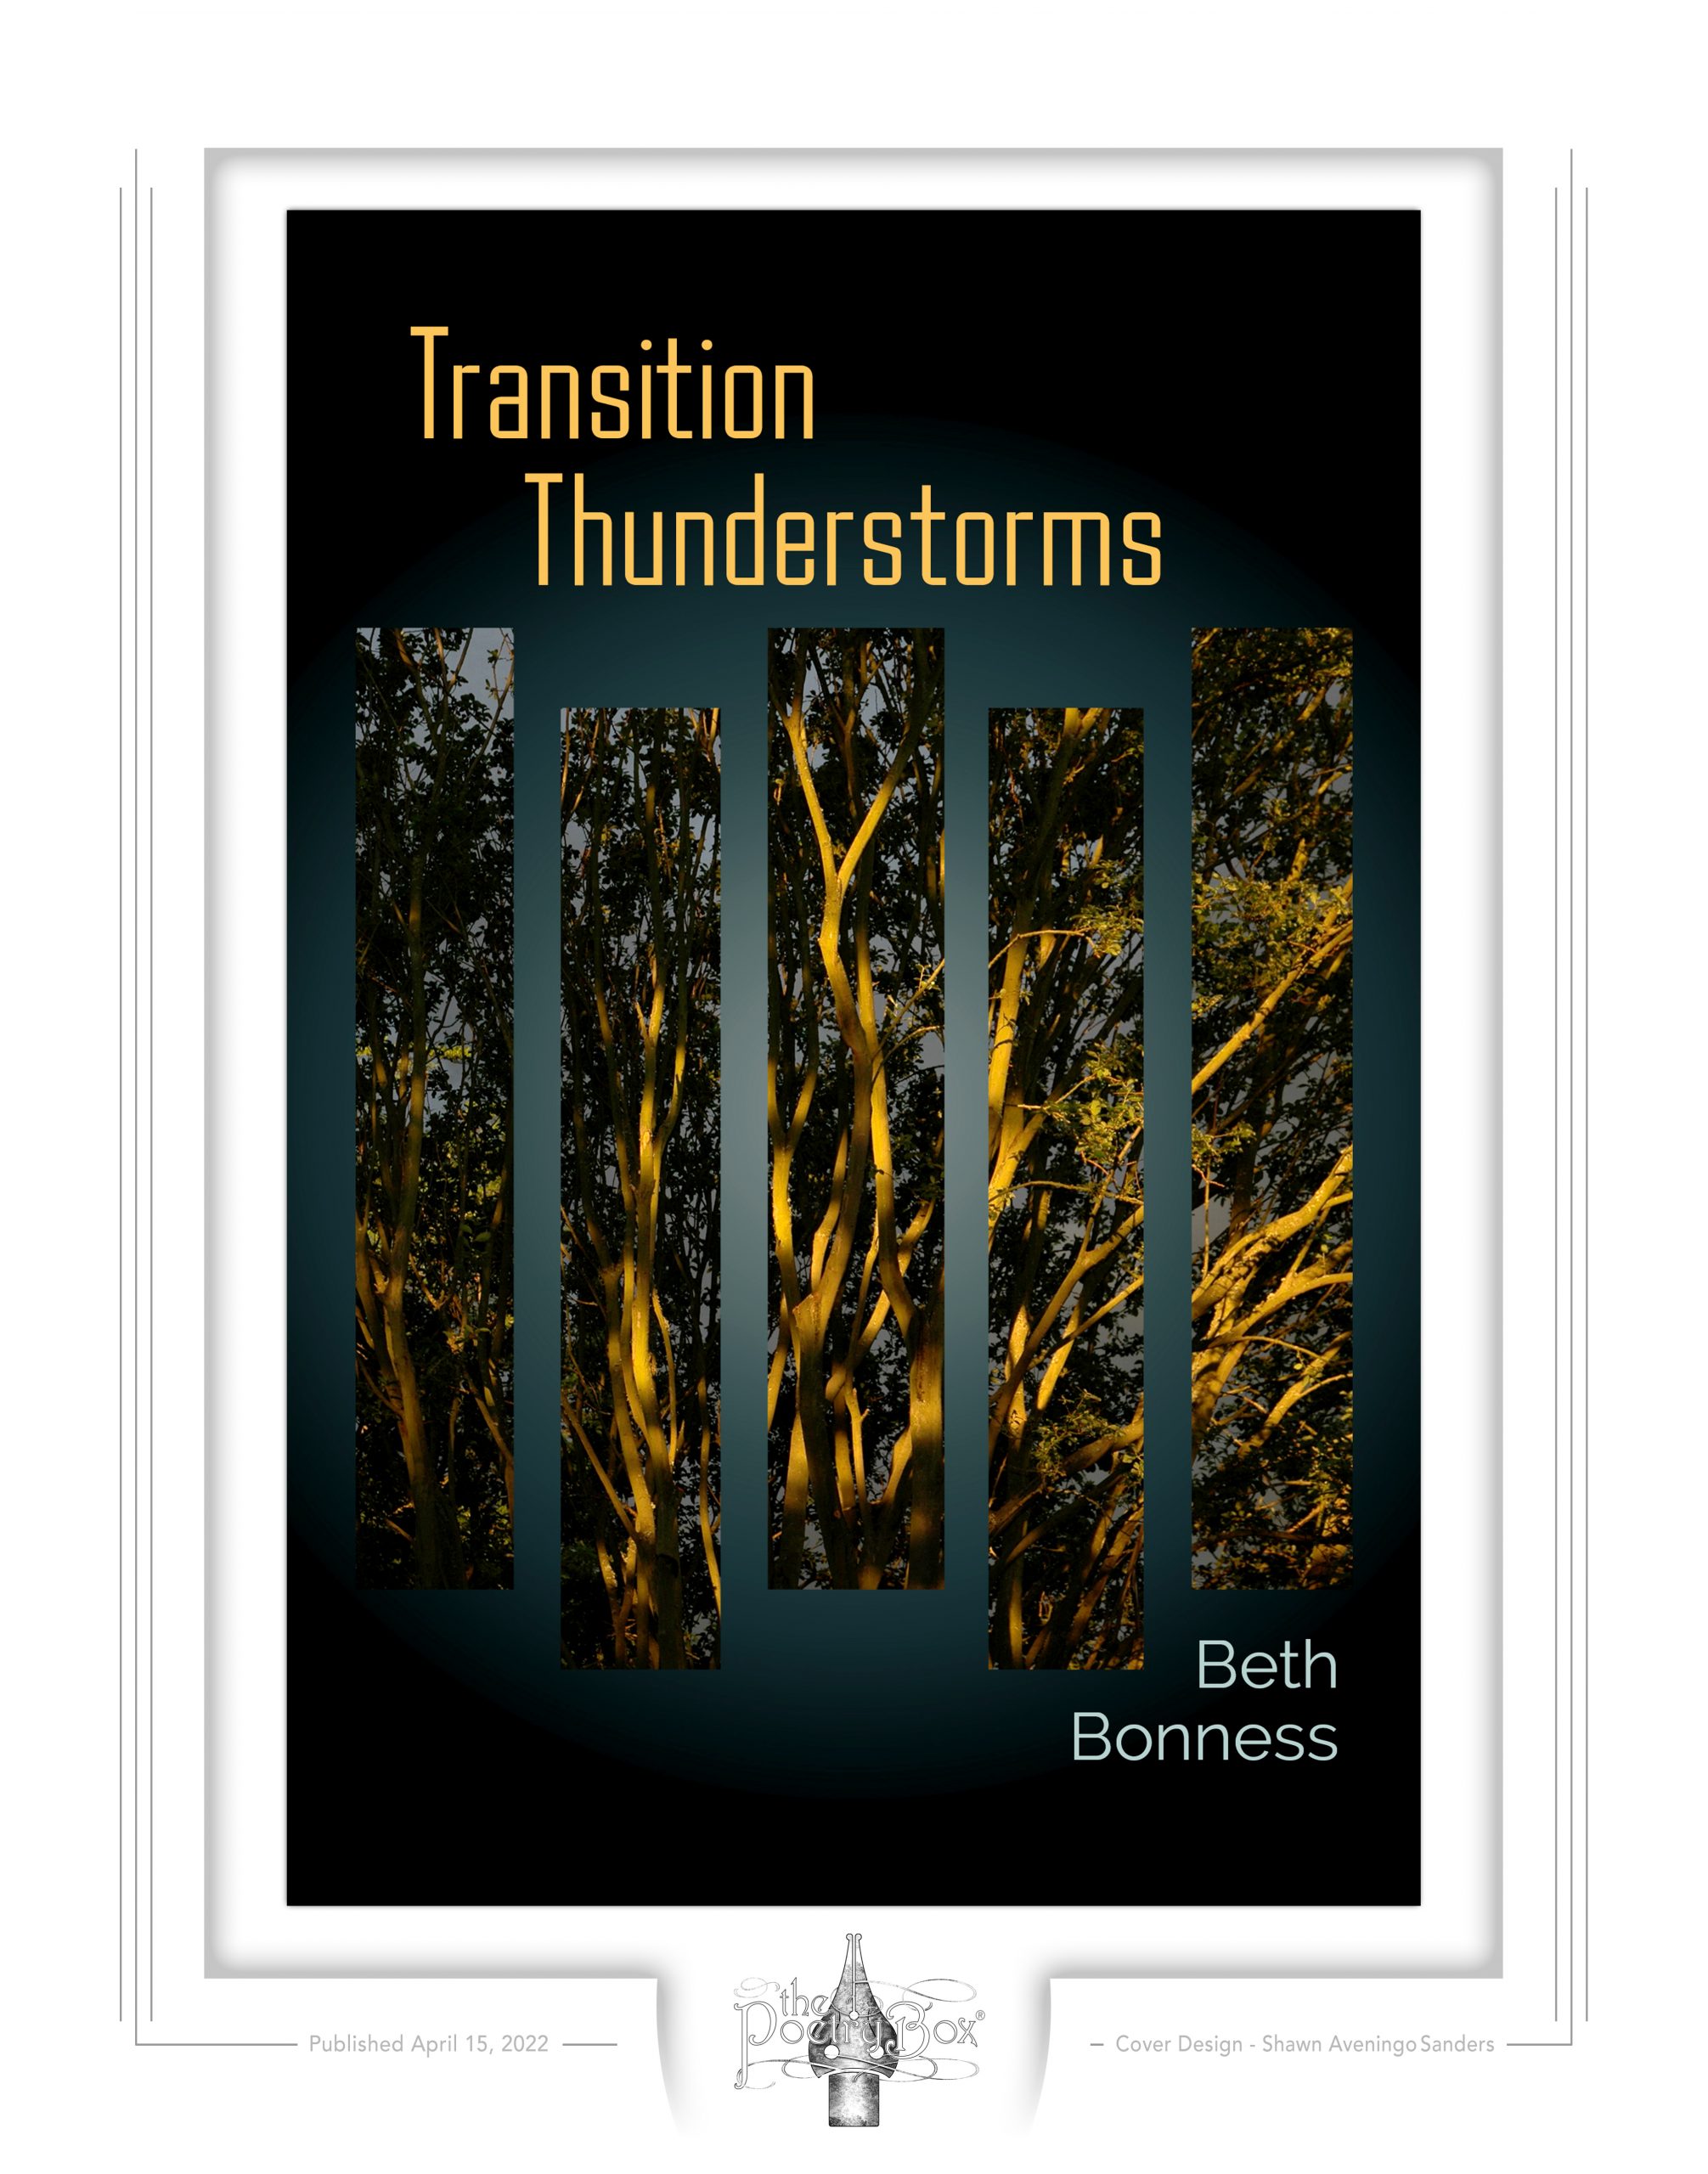 "Transition Thunderstorms"